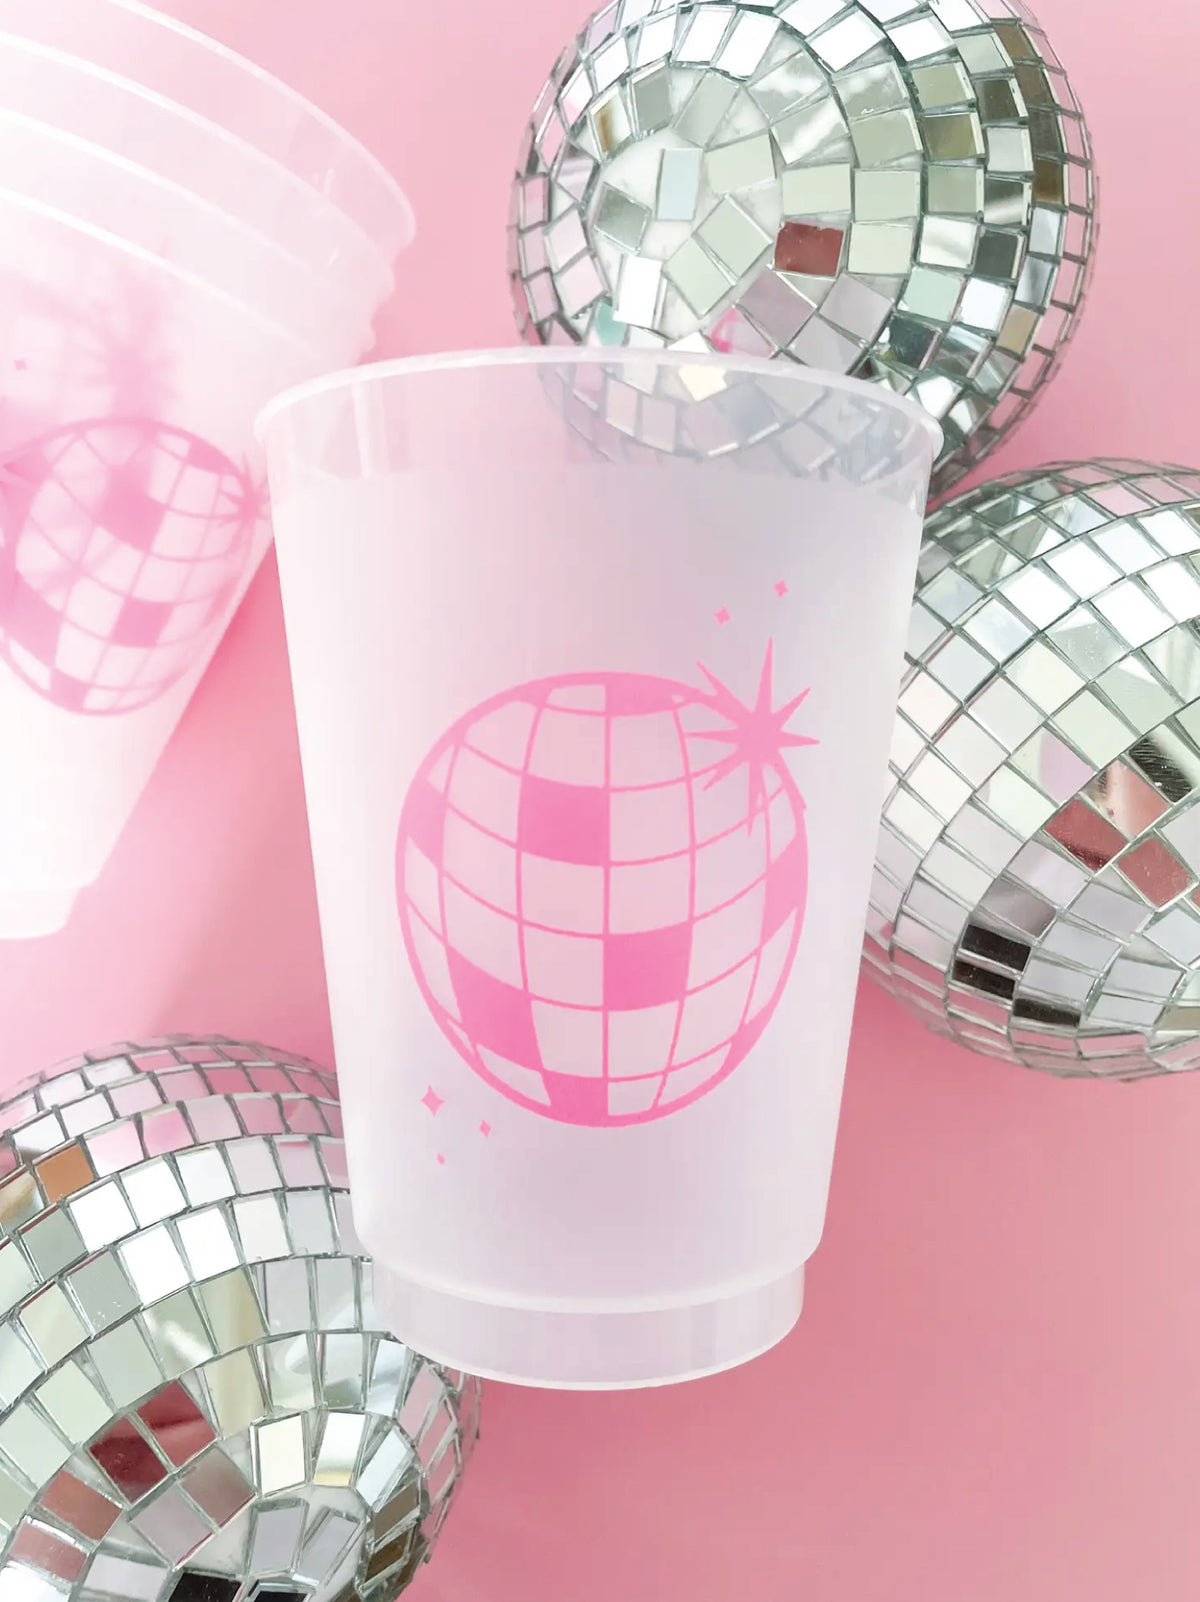 12 Ct Farmer Mouse Party Cups: customize 